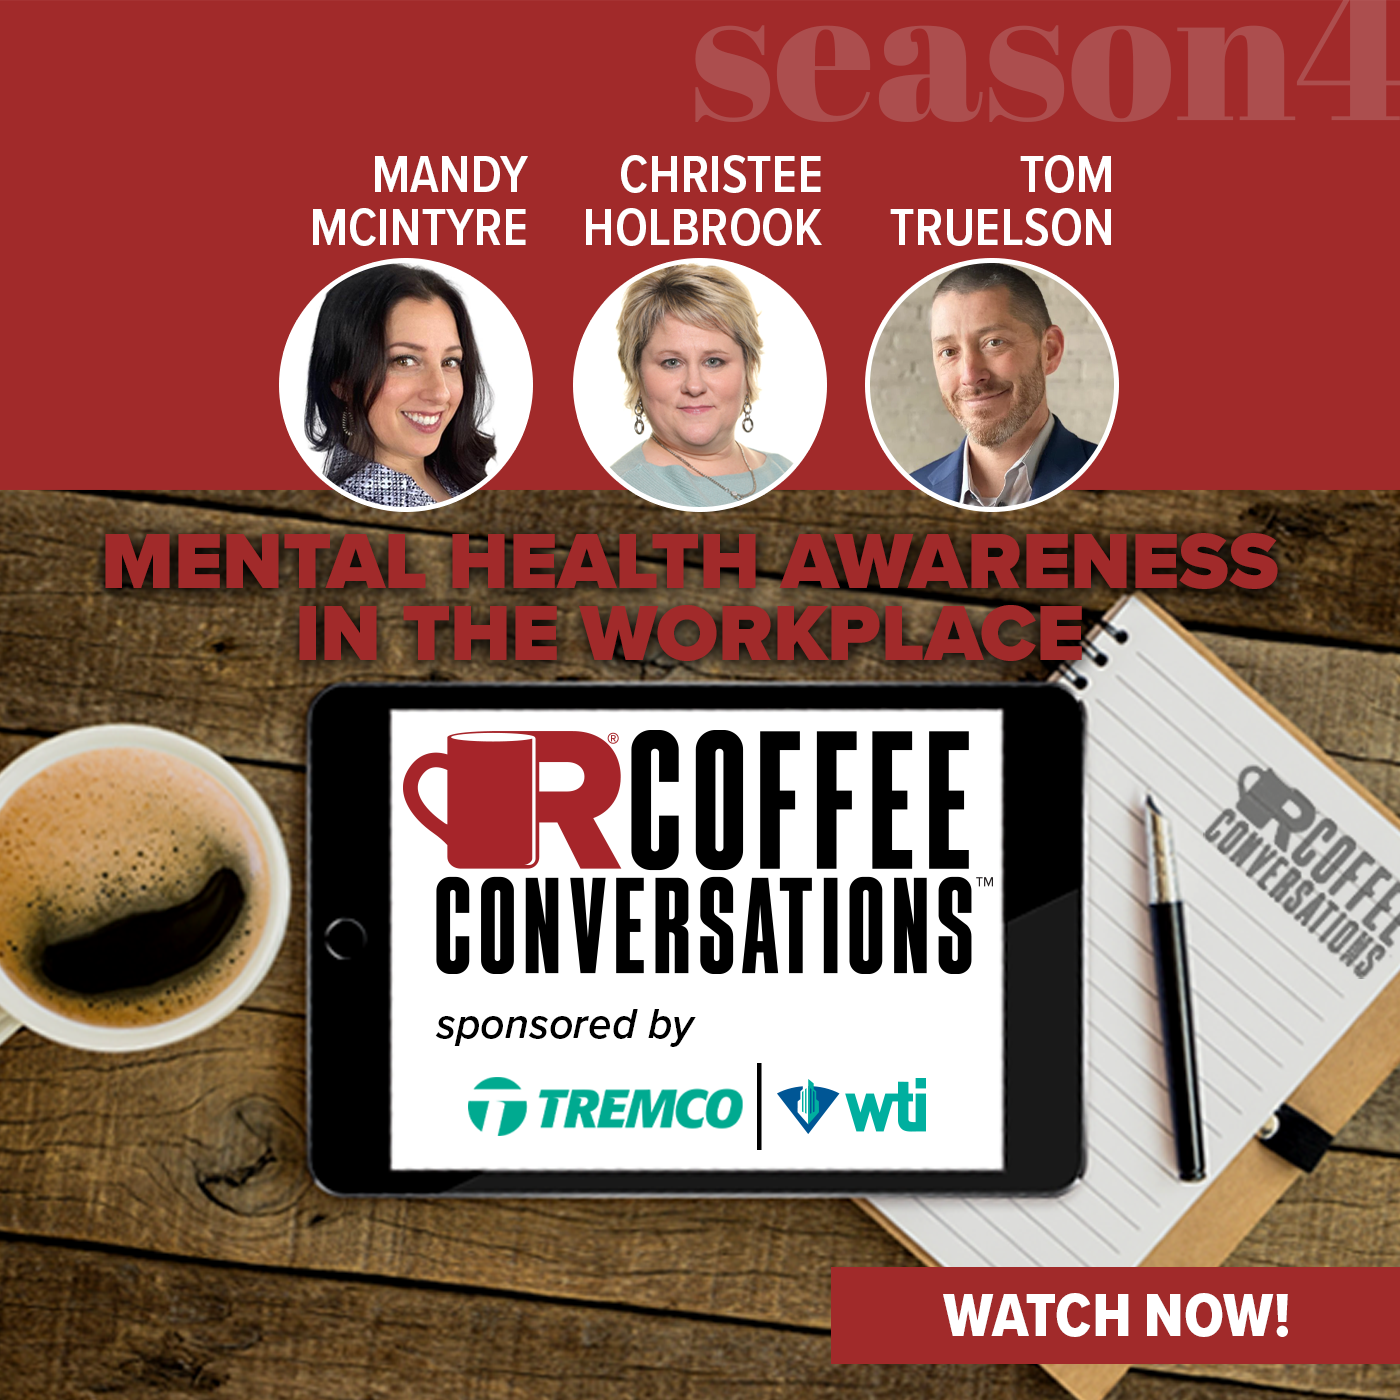 Tremco/WTI - Coffee Conversations - Mental Health Awareness in the Workplace - Sponsored by Tremco & WTI - POD